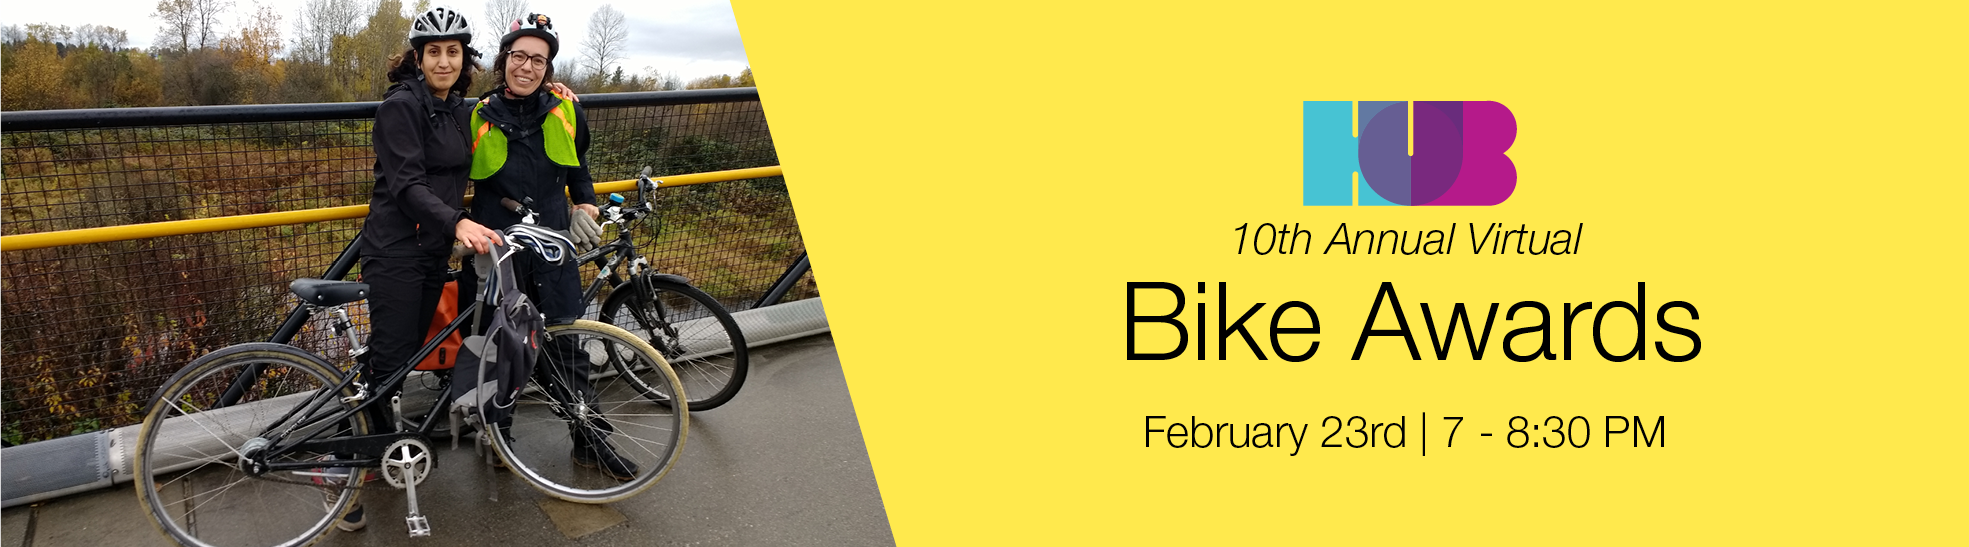 The banner for the 10th Annual Virtual HUB Bike Awards. The event took place on February 23 from 7-8:30 PM